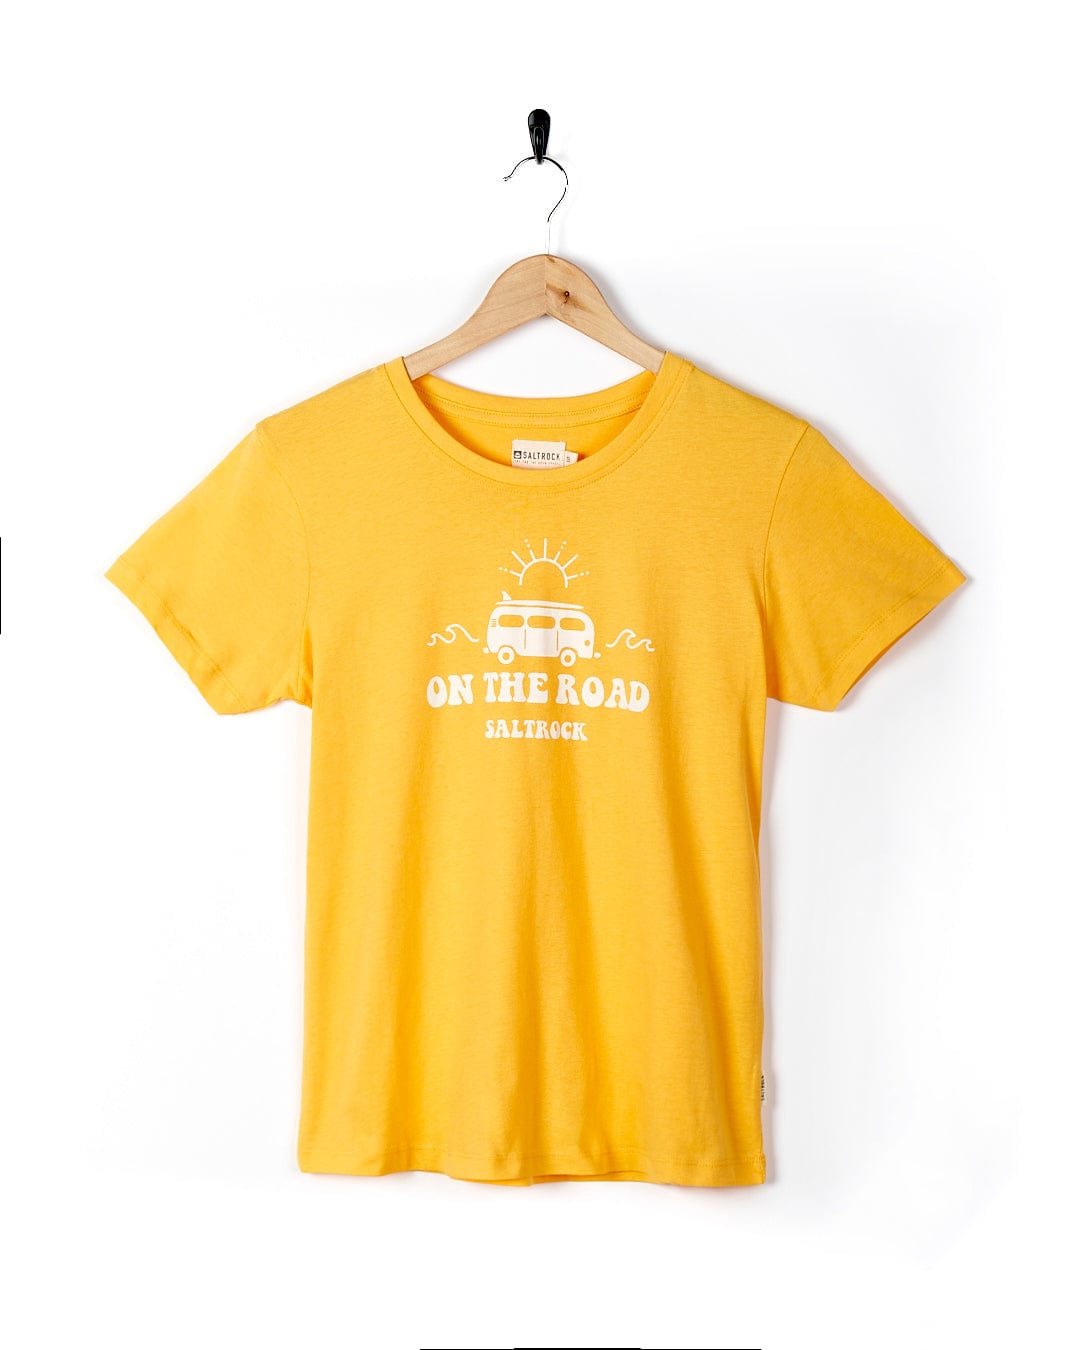 A Saltrock yellow t-shirt that says On The Road - Womens Short Sleeve T-Shirt.